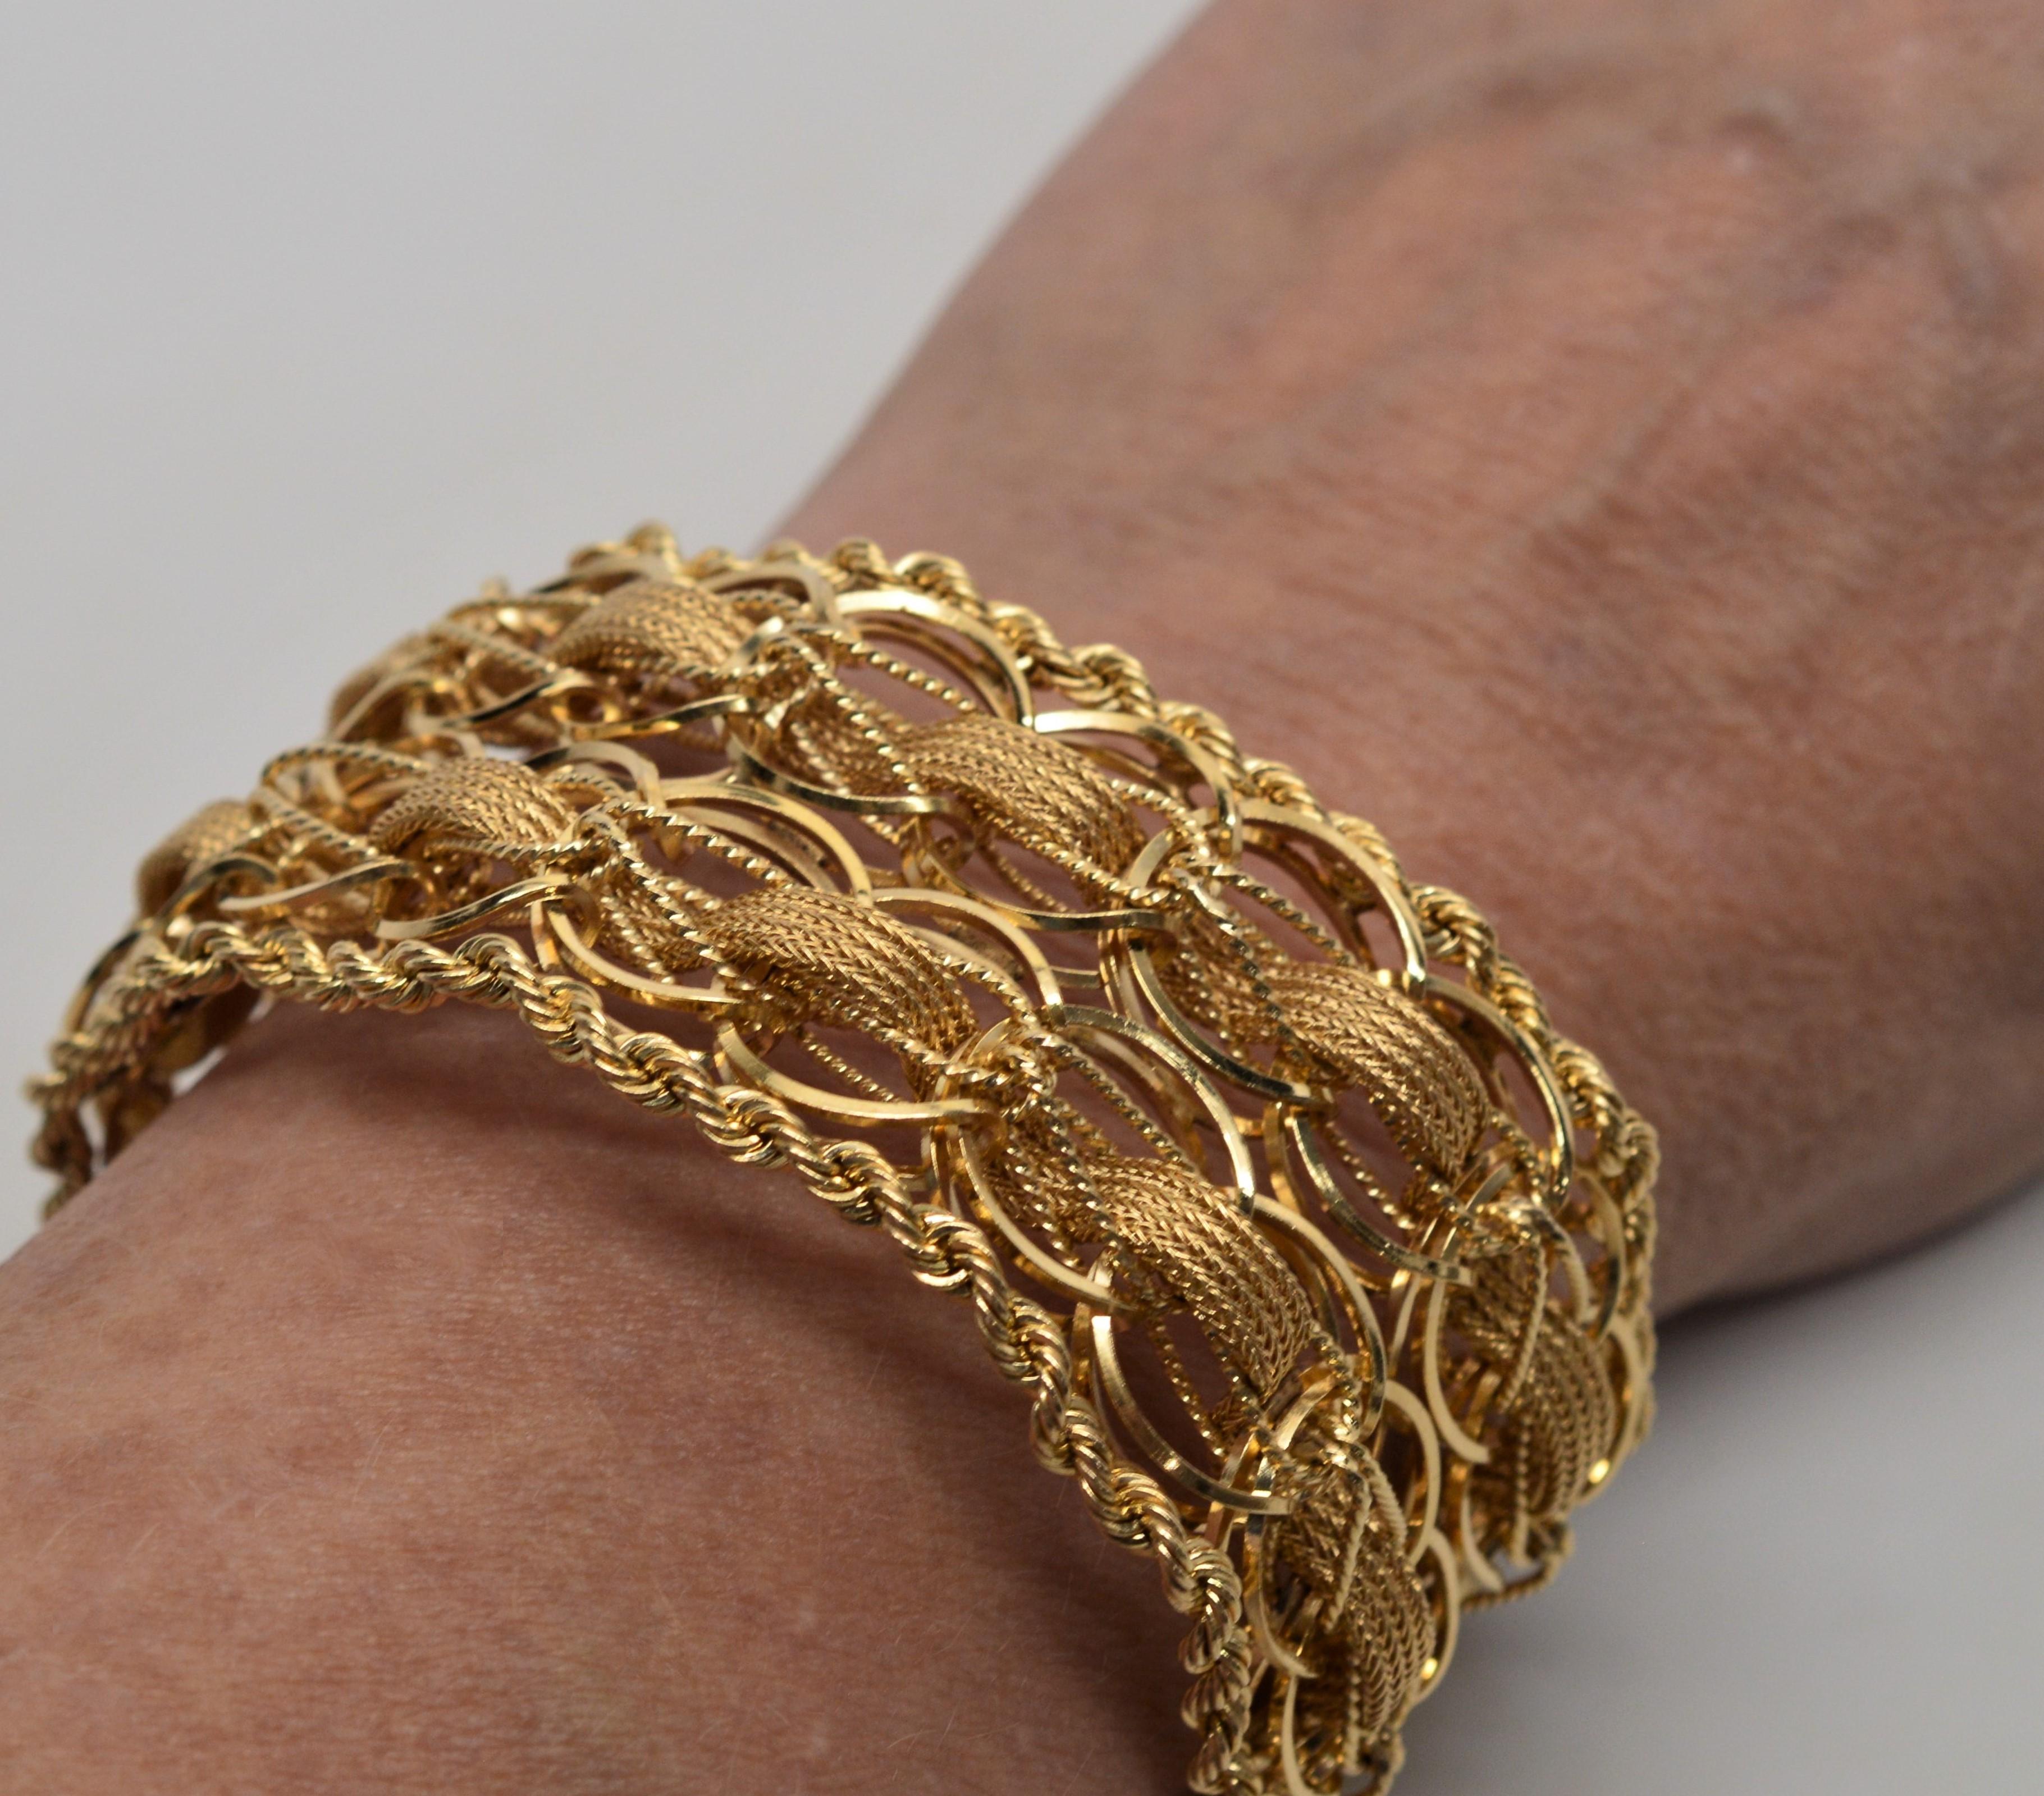  Wide Woven Double Chain Link 14 Karat Yellow Gold Bracelet In Excellent Condition For Sale In Mount Kisco, NY